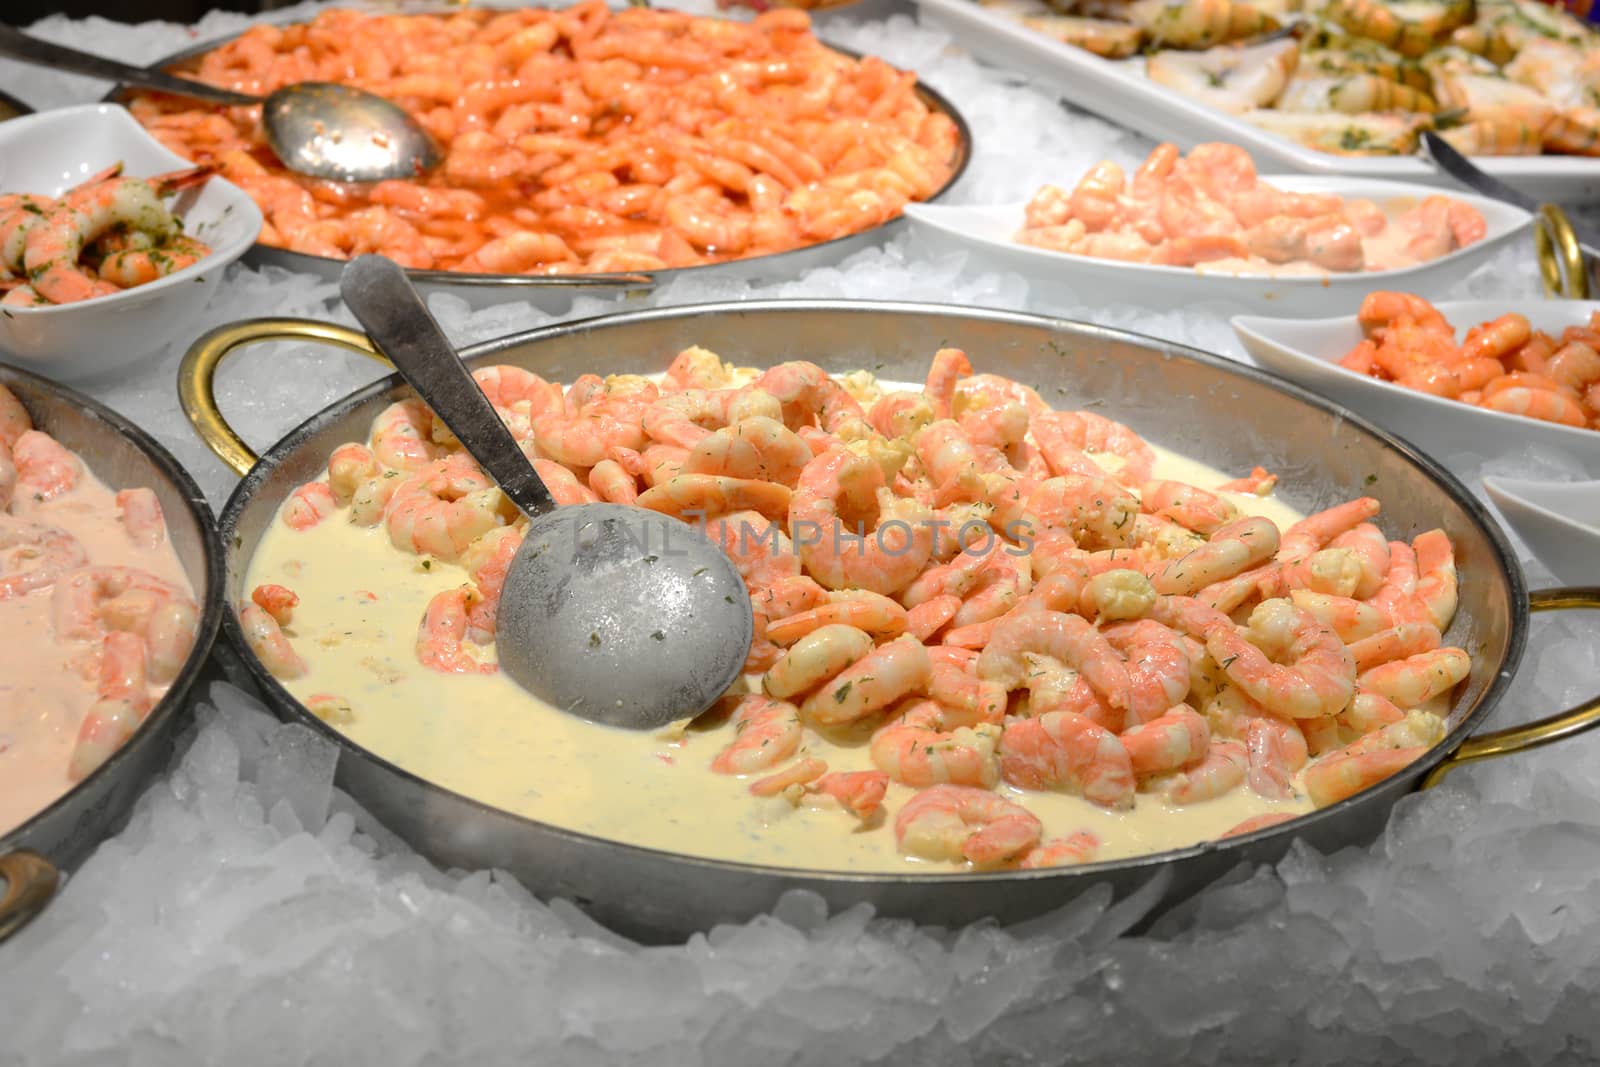 cooked peeled prawns in stainless steel plate on ice; street food in Salzburg, Austria